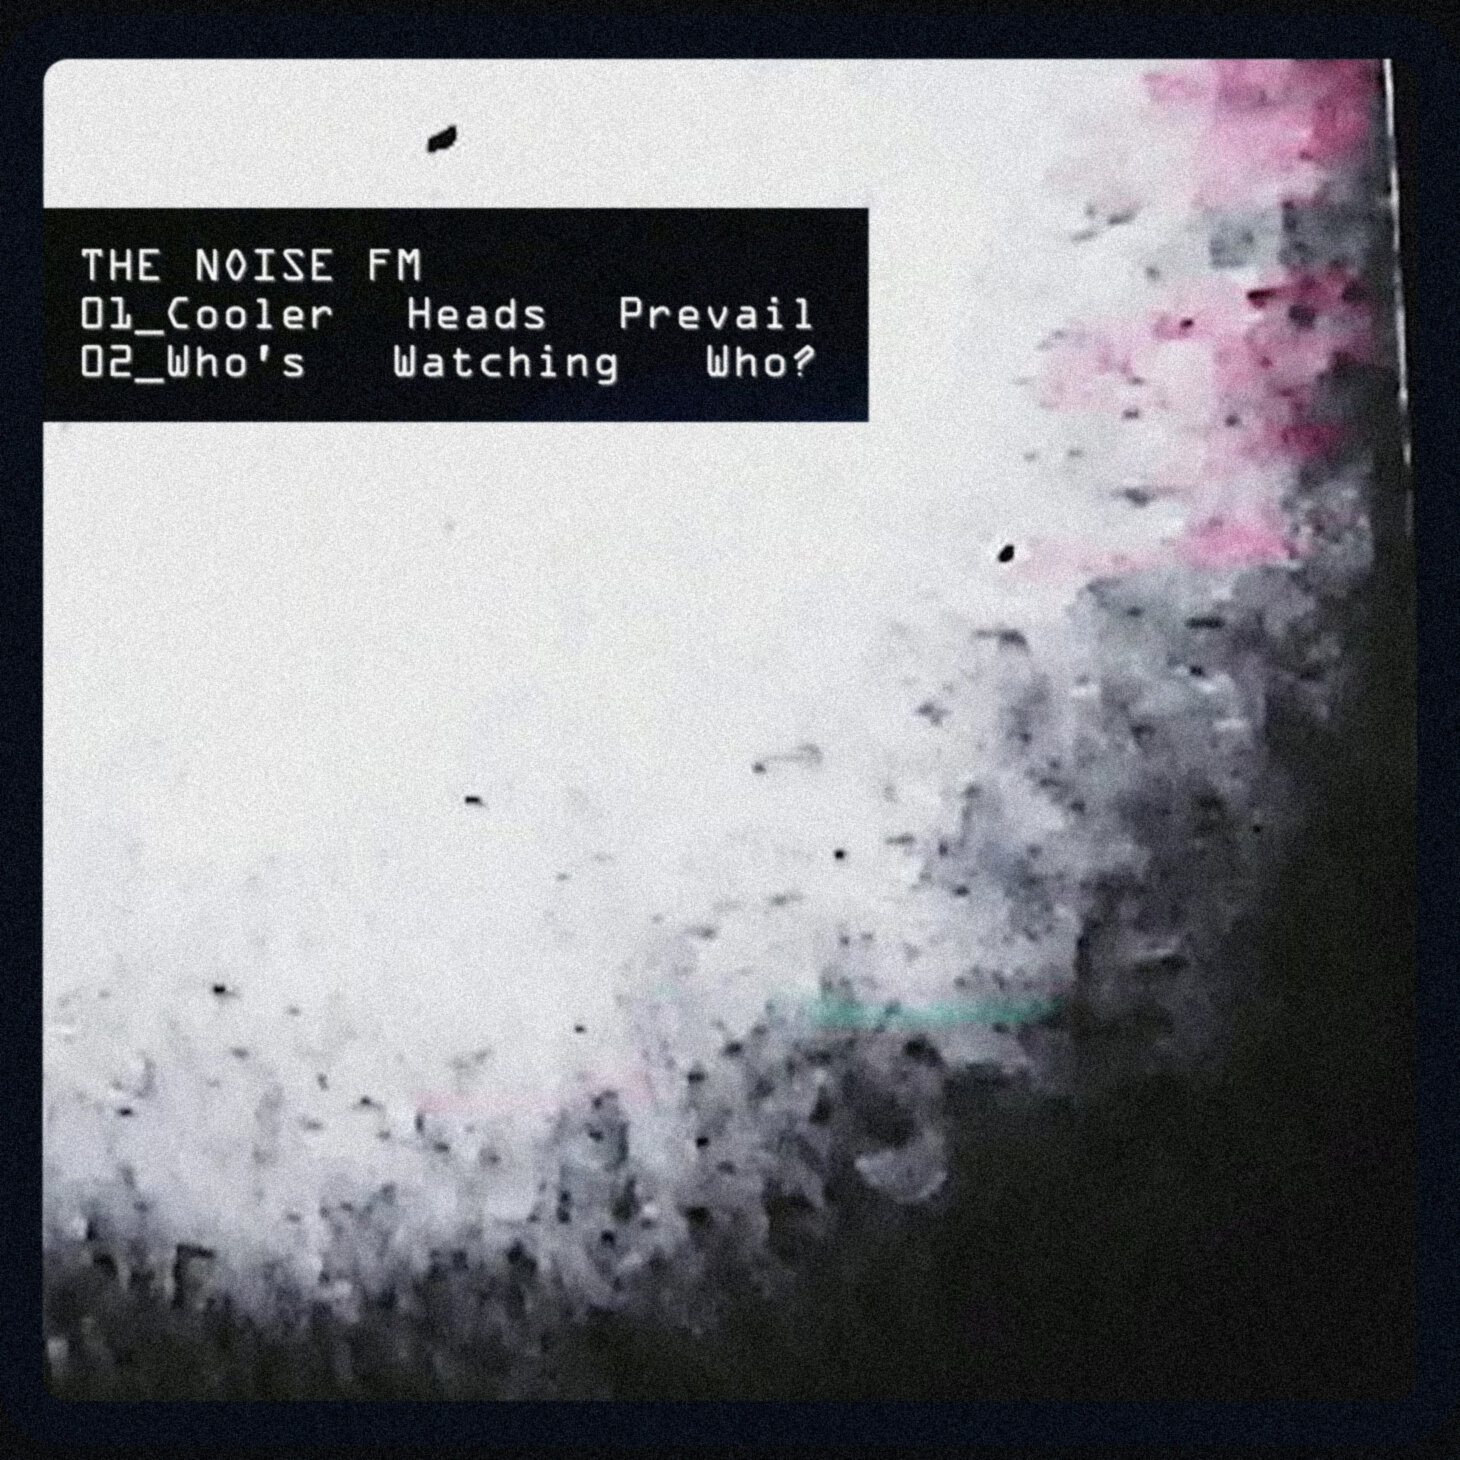 The Noise FM - Cooler Heads Prevail / Who's Watching Who